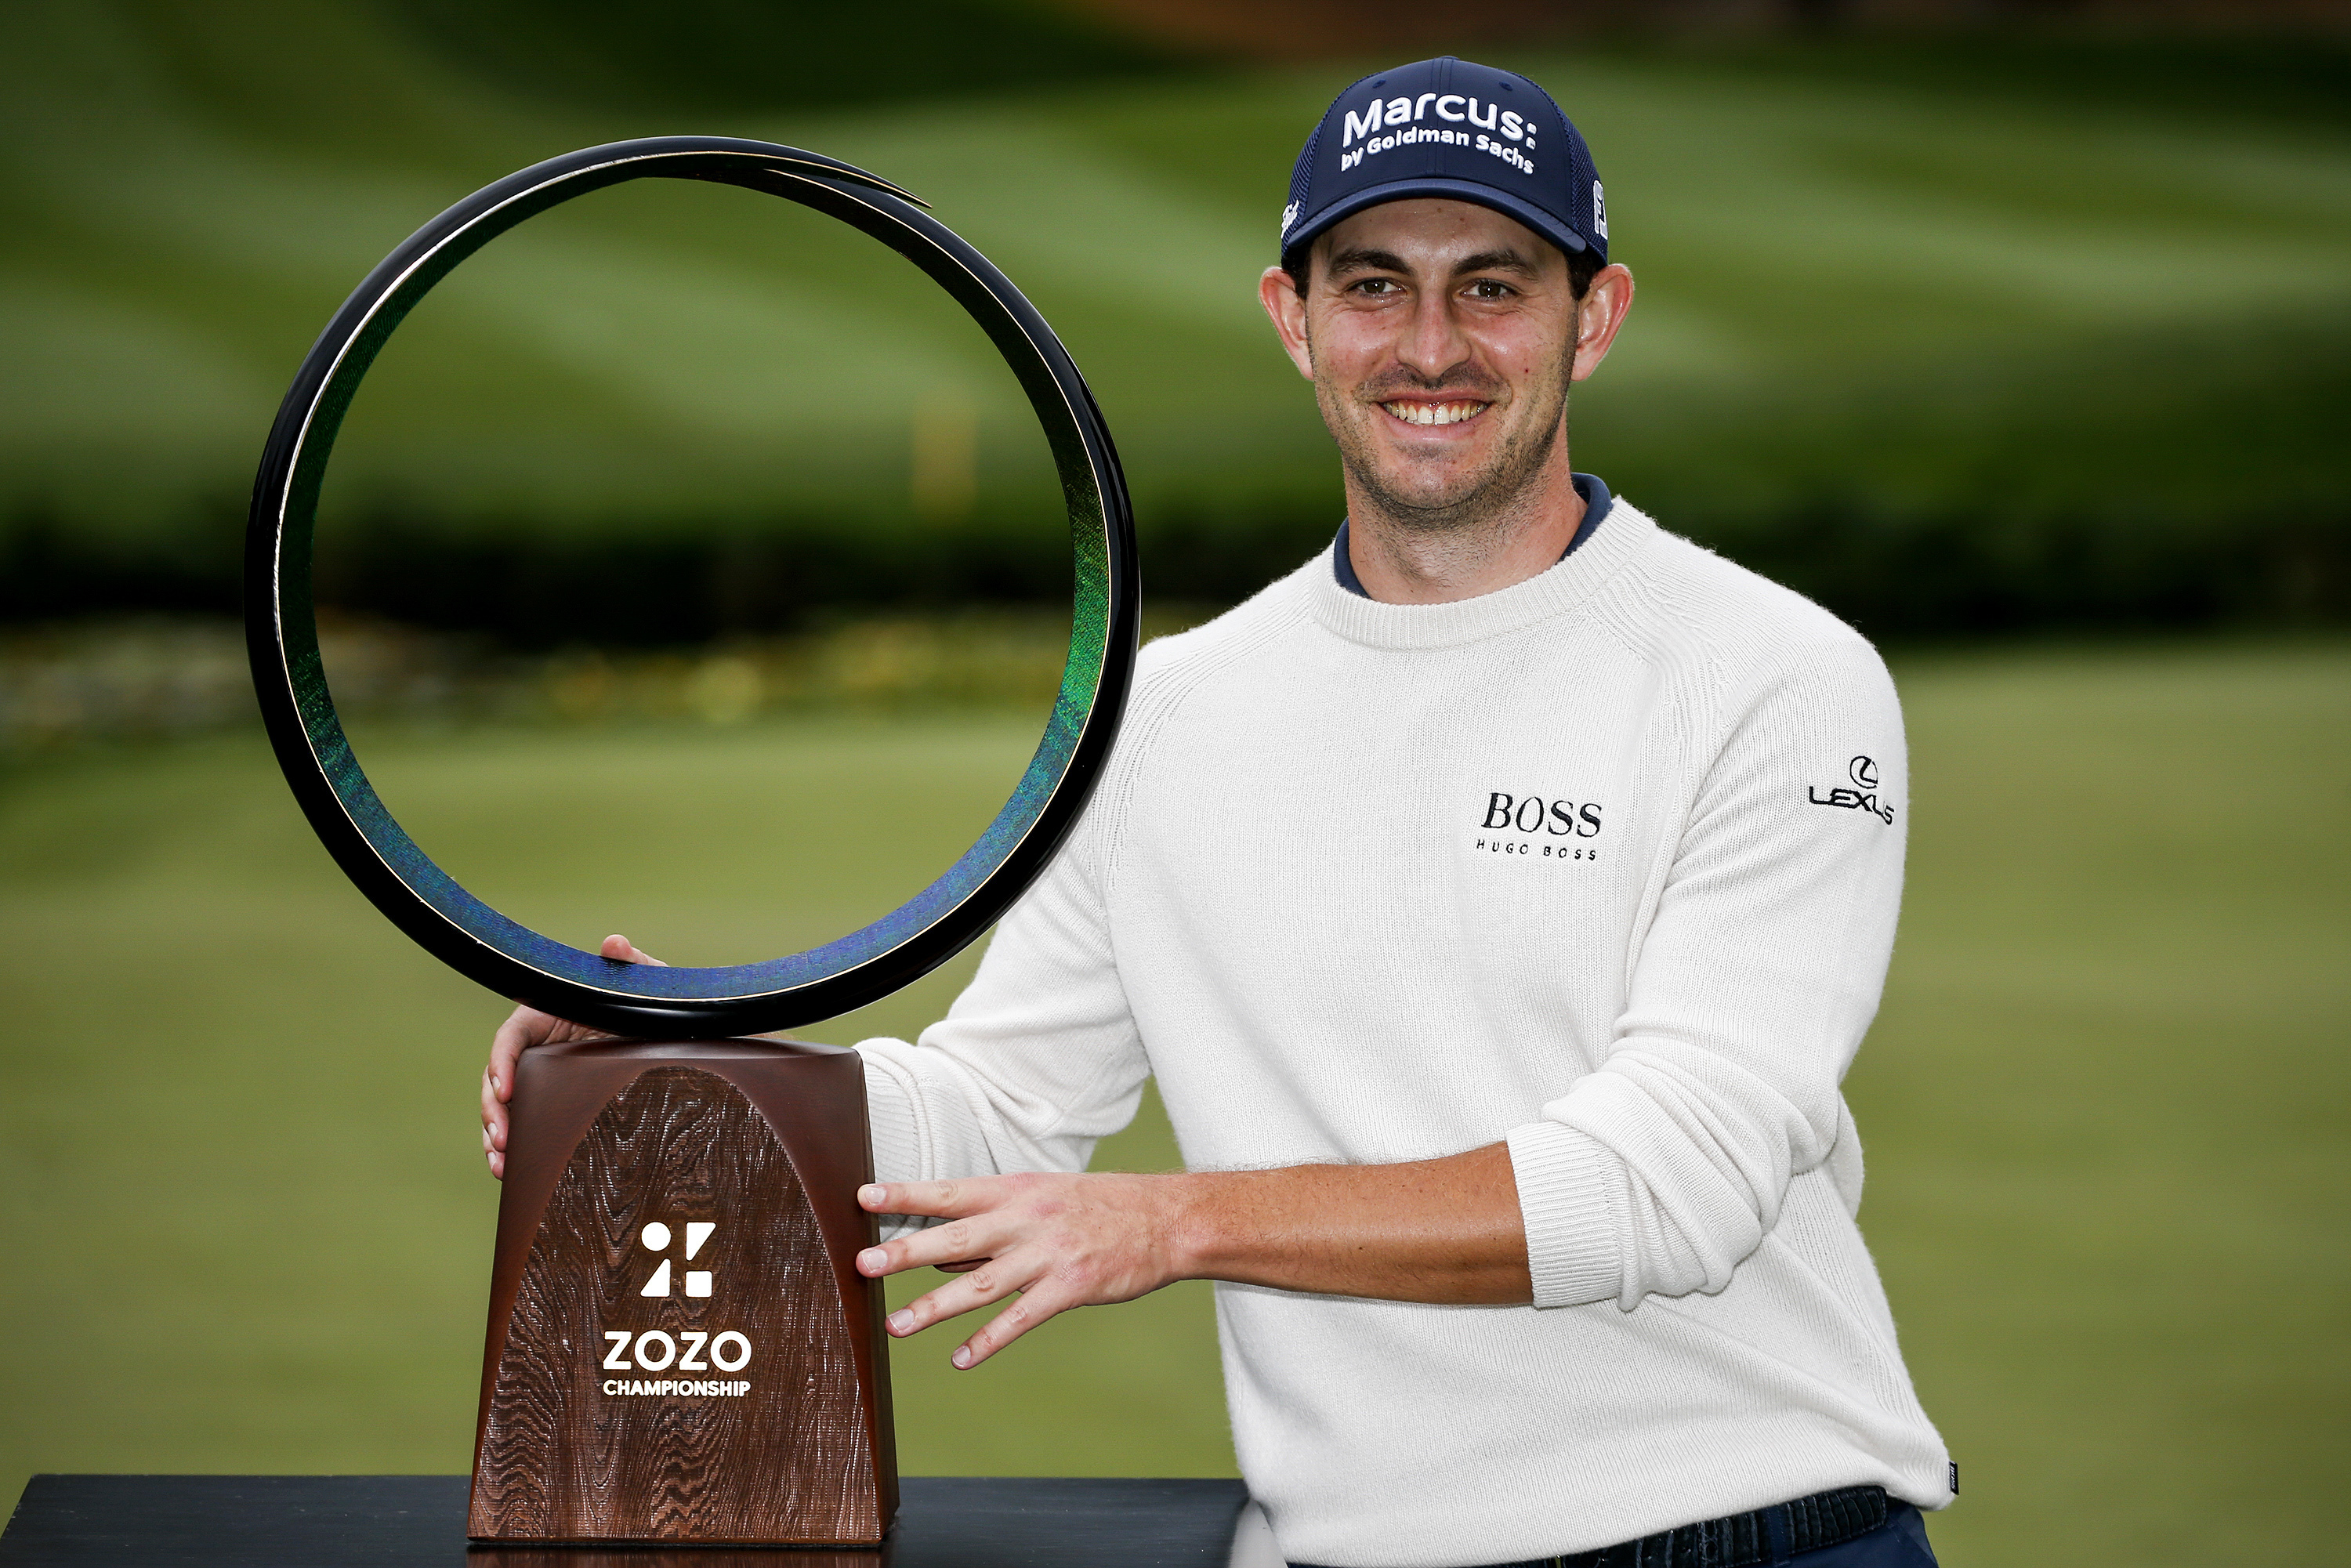 Patrick Cantlay rallies from 4 back to win Zozo Championship